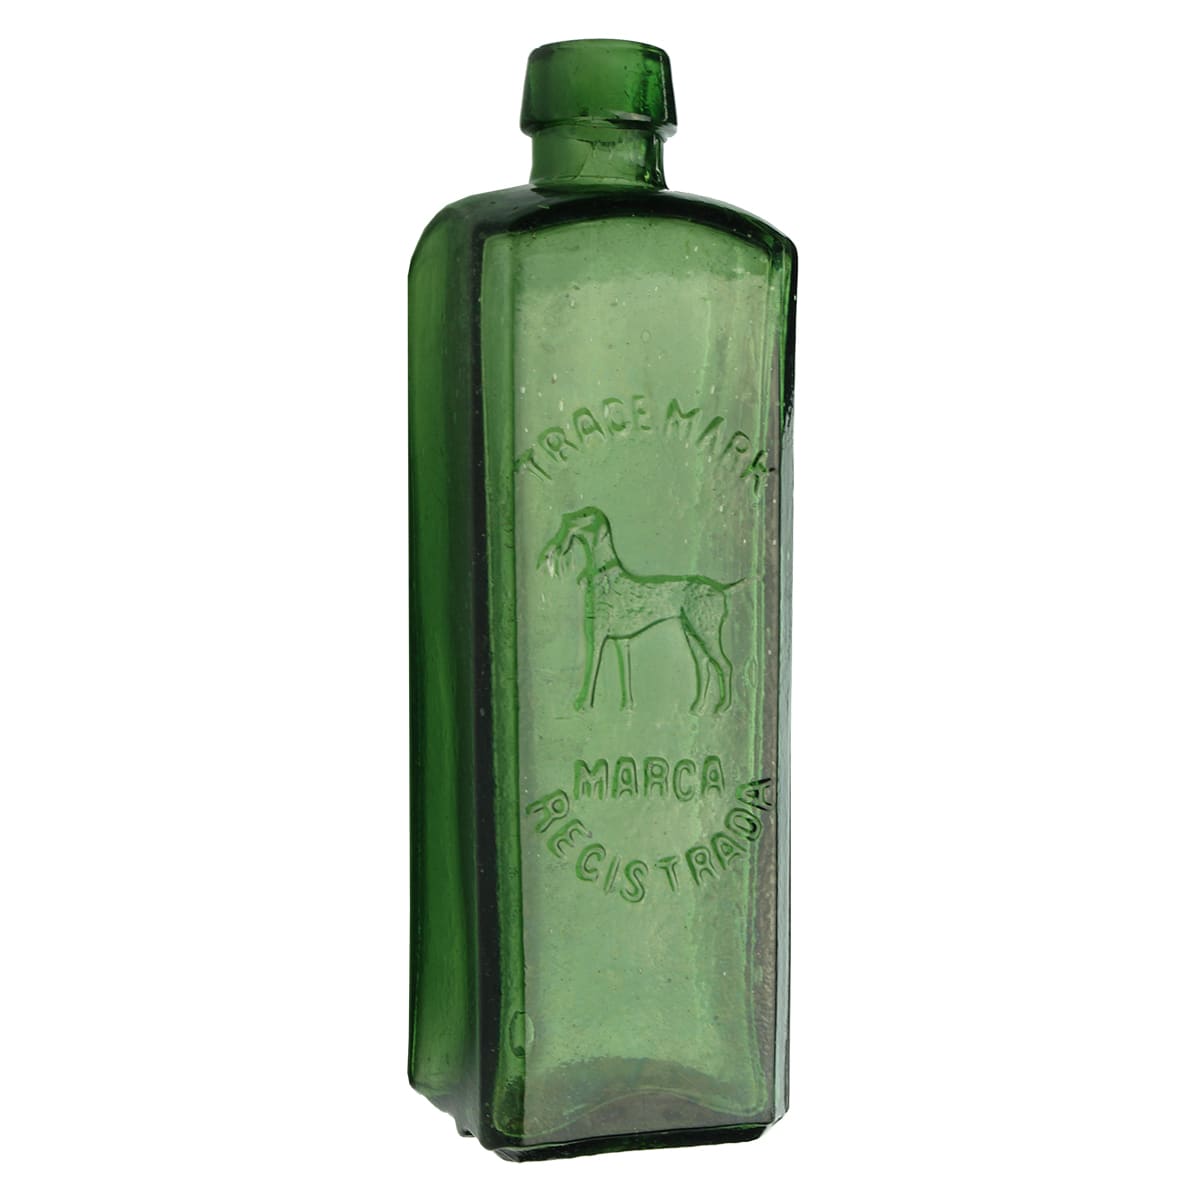 Schnapps. Peters. Dog Trade Mark. Applied top. Green. 13 oz.